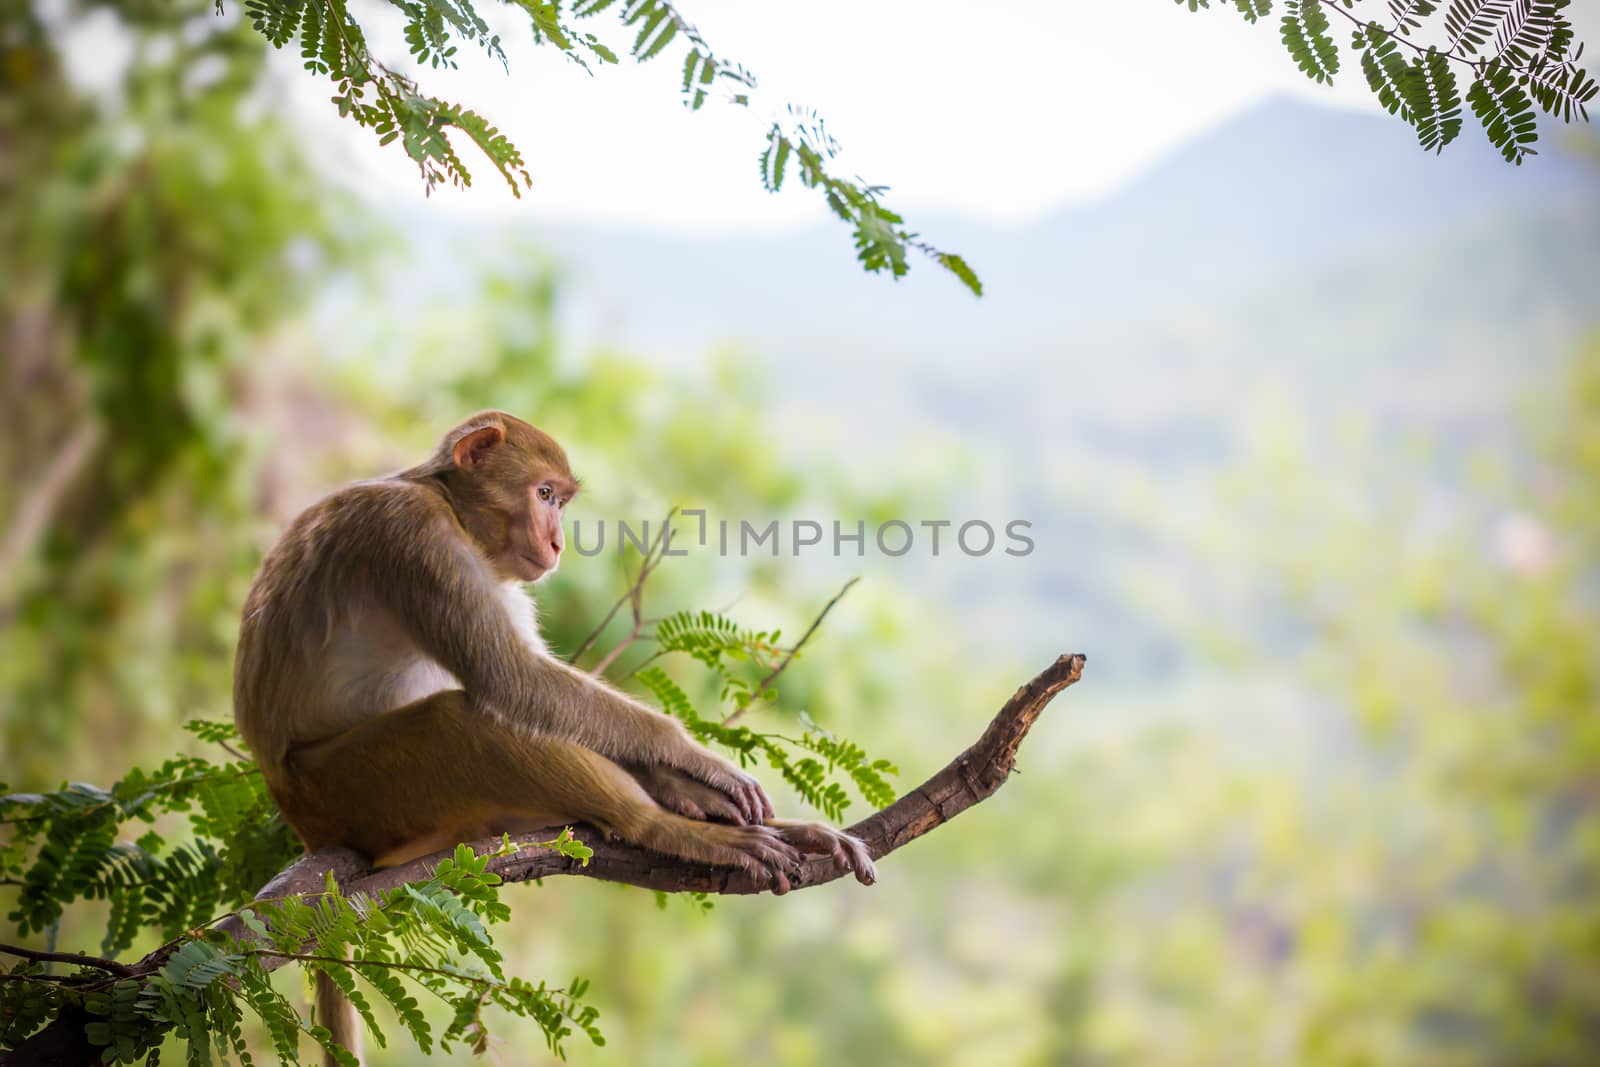 Male monkey sitting on a tamarin branch and mountain background.